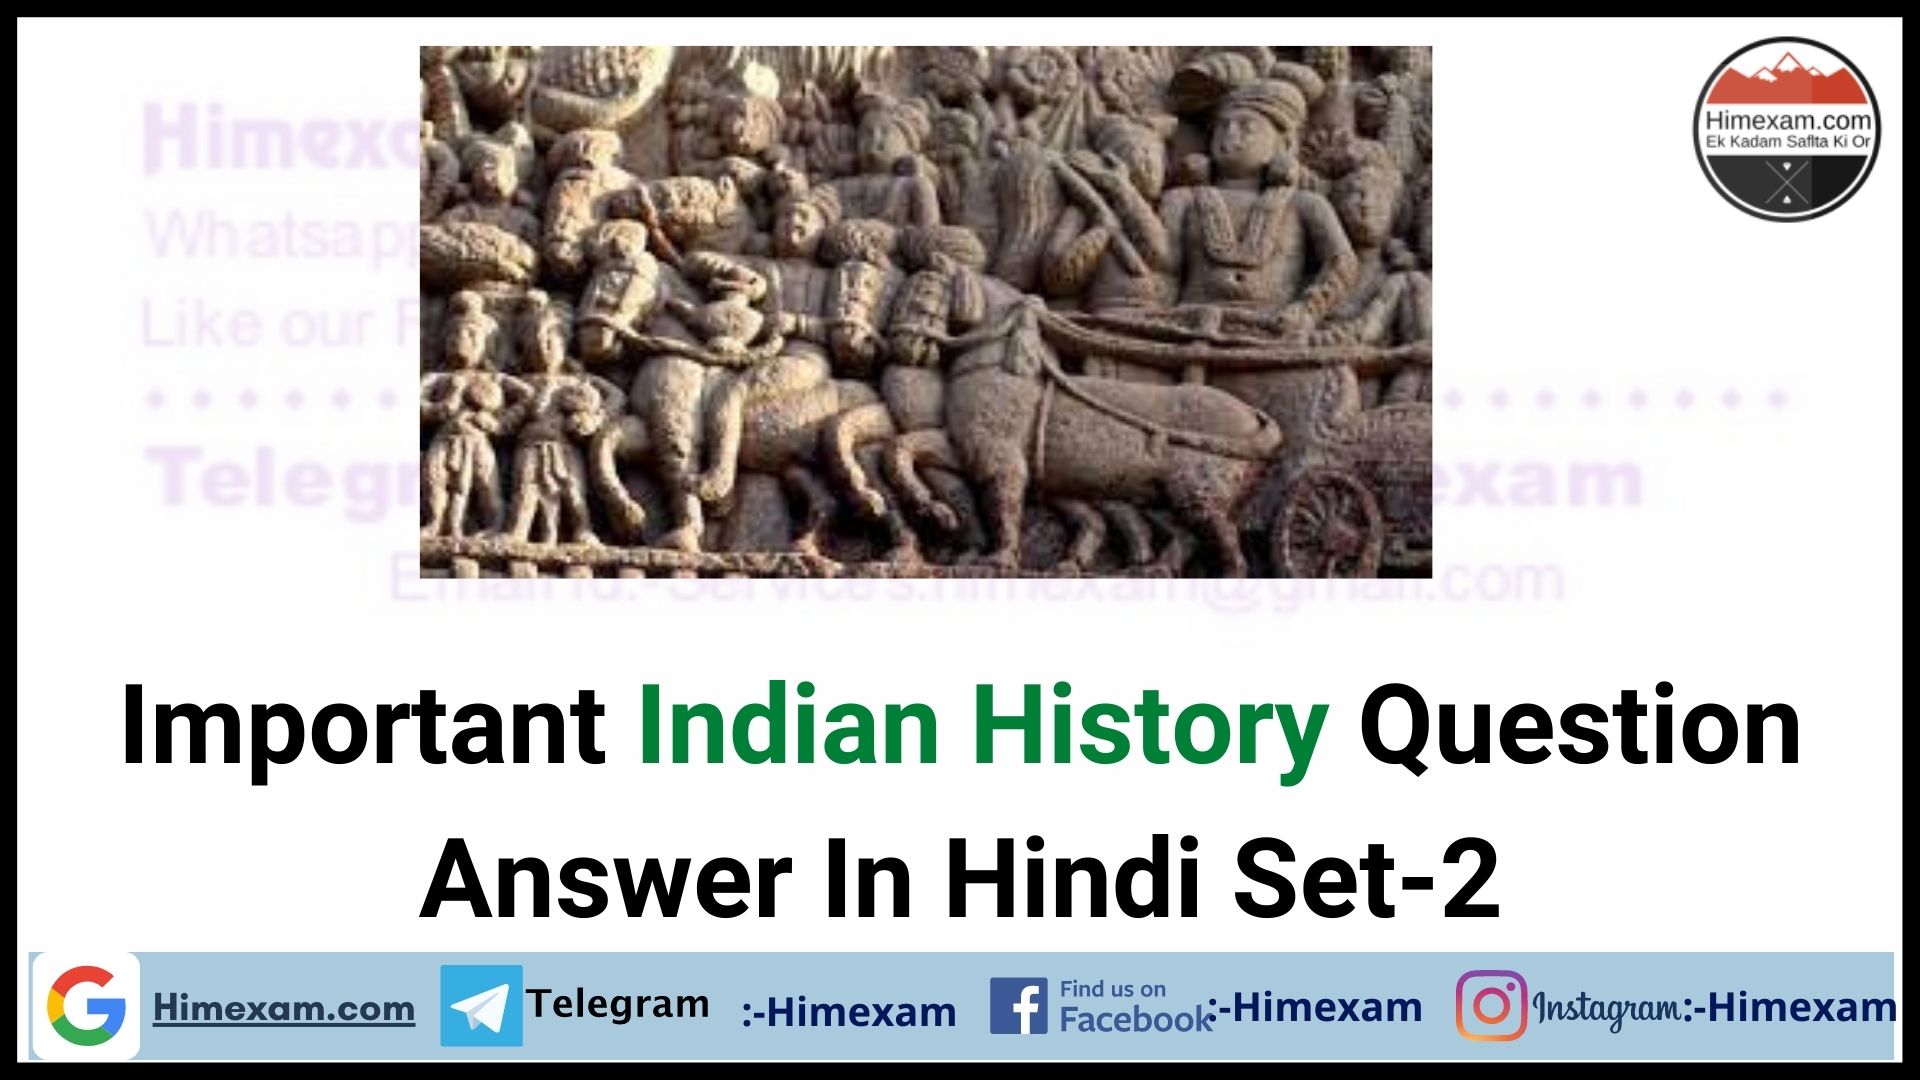 Important Indian History Question Answer In Hindi Set-2